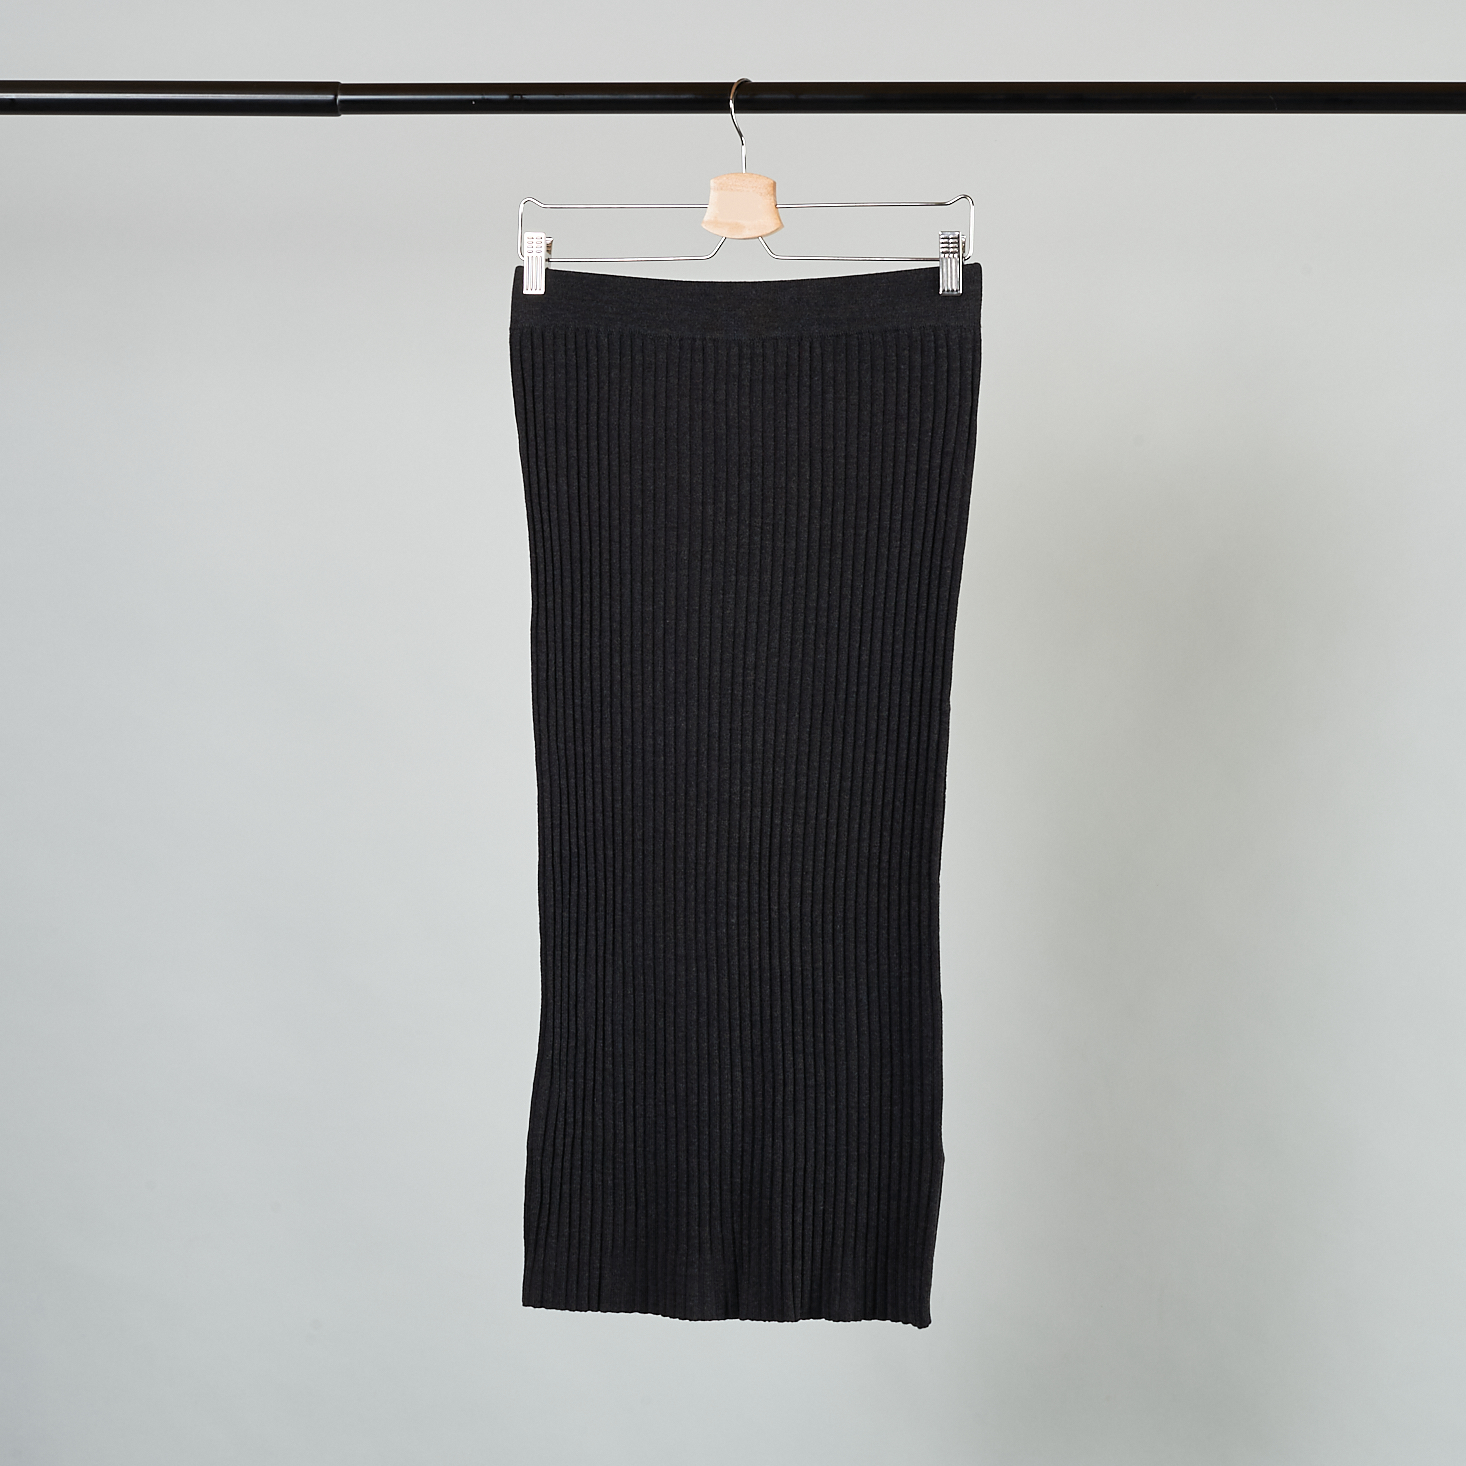 black knit skirt from Frank and Oak